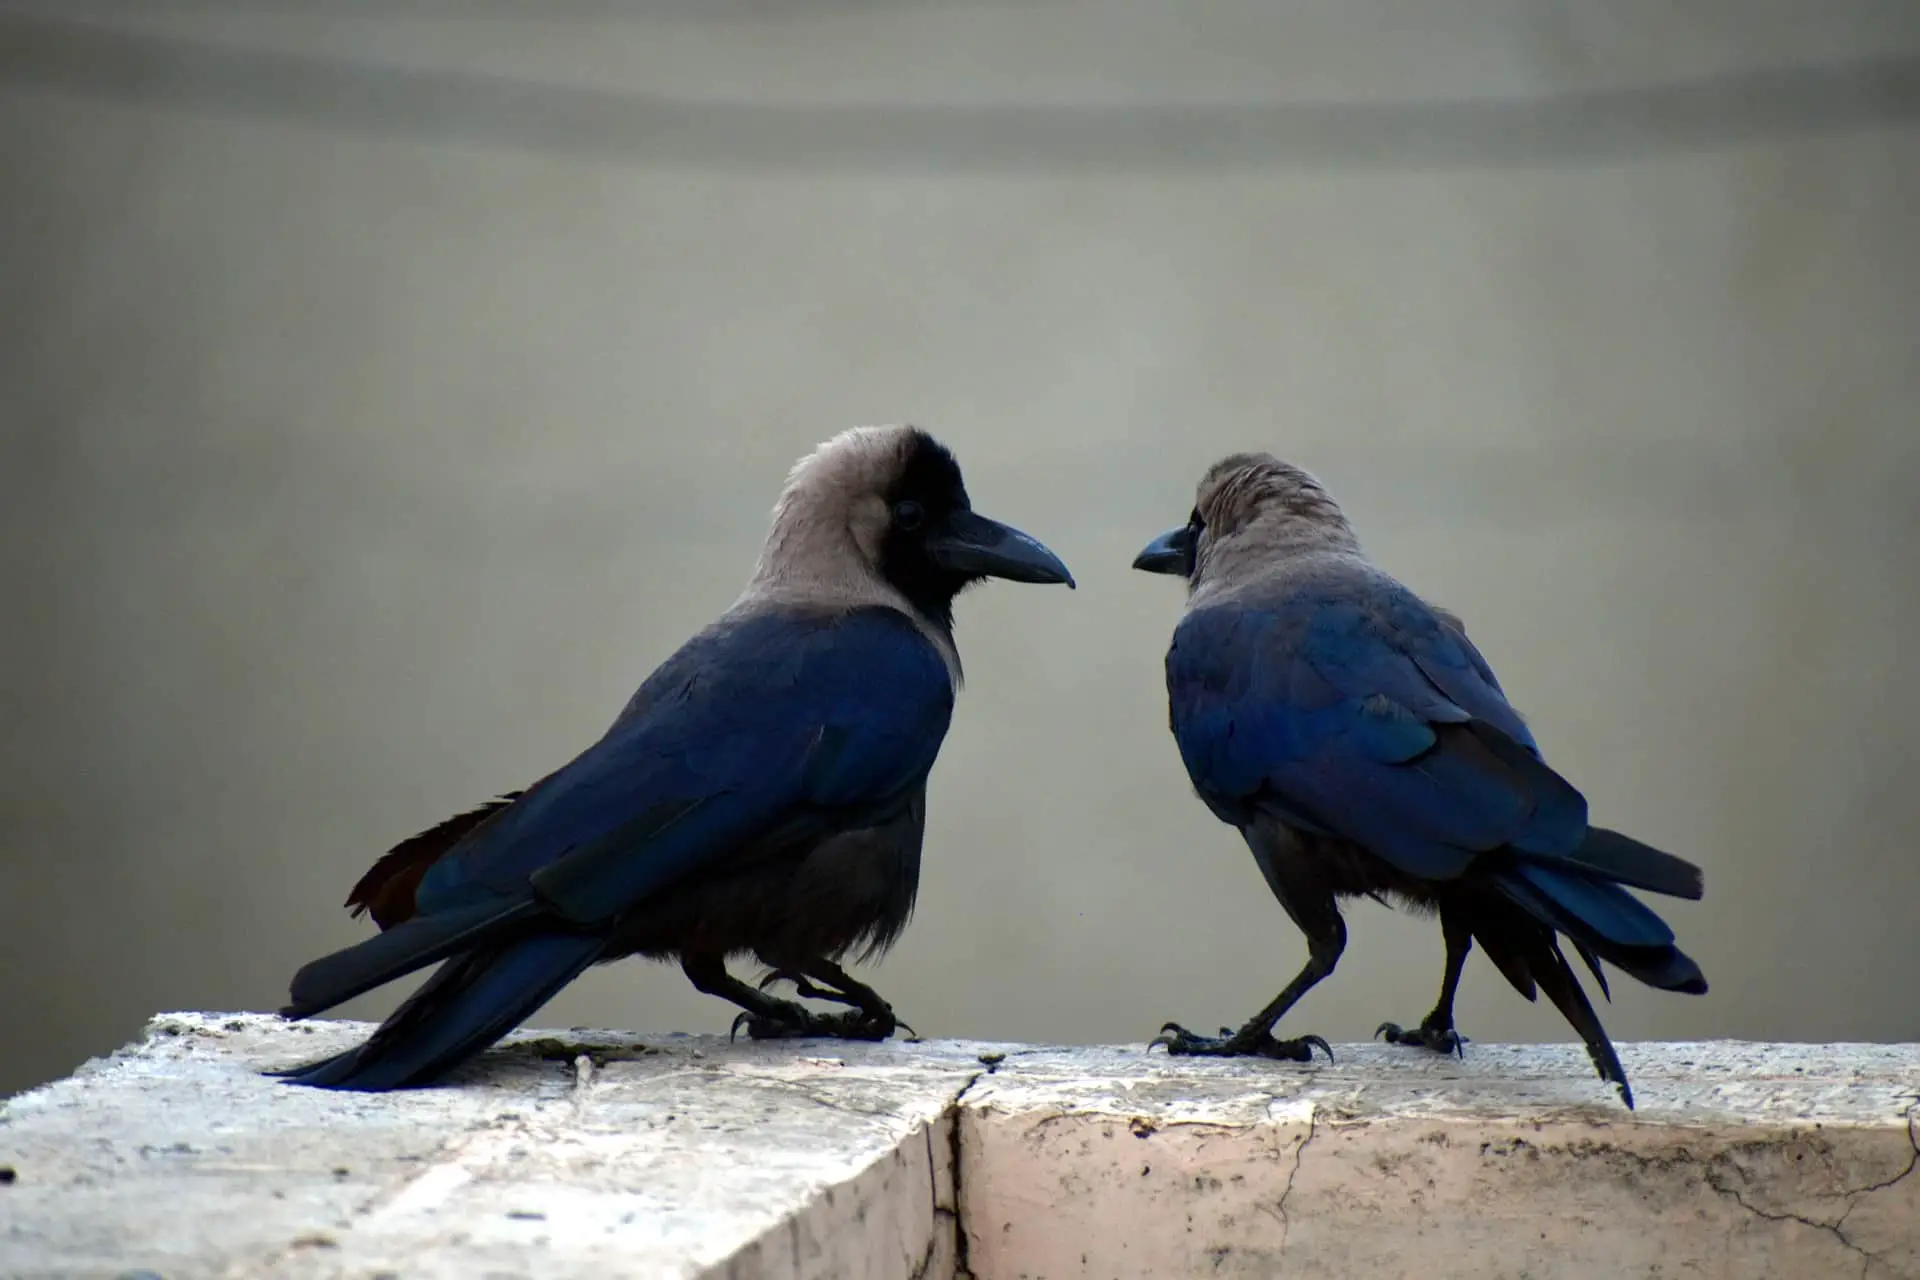 Are Crows Monogamous? Do Crows only have one mate during their lifetime?